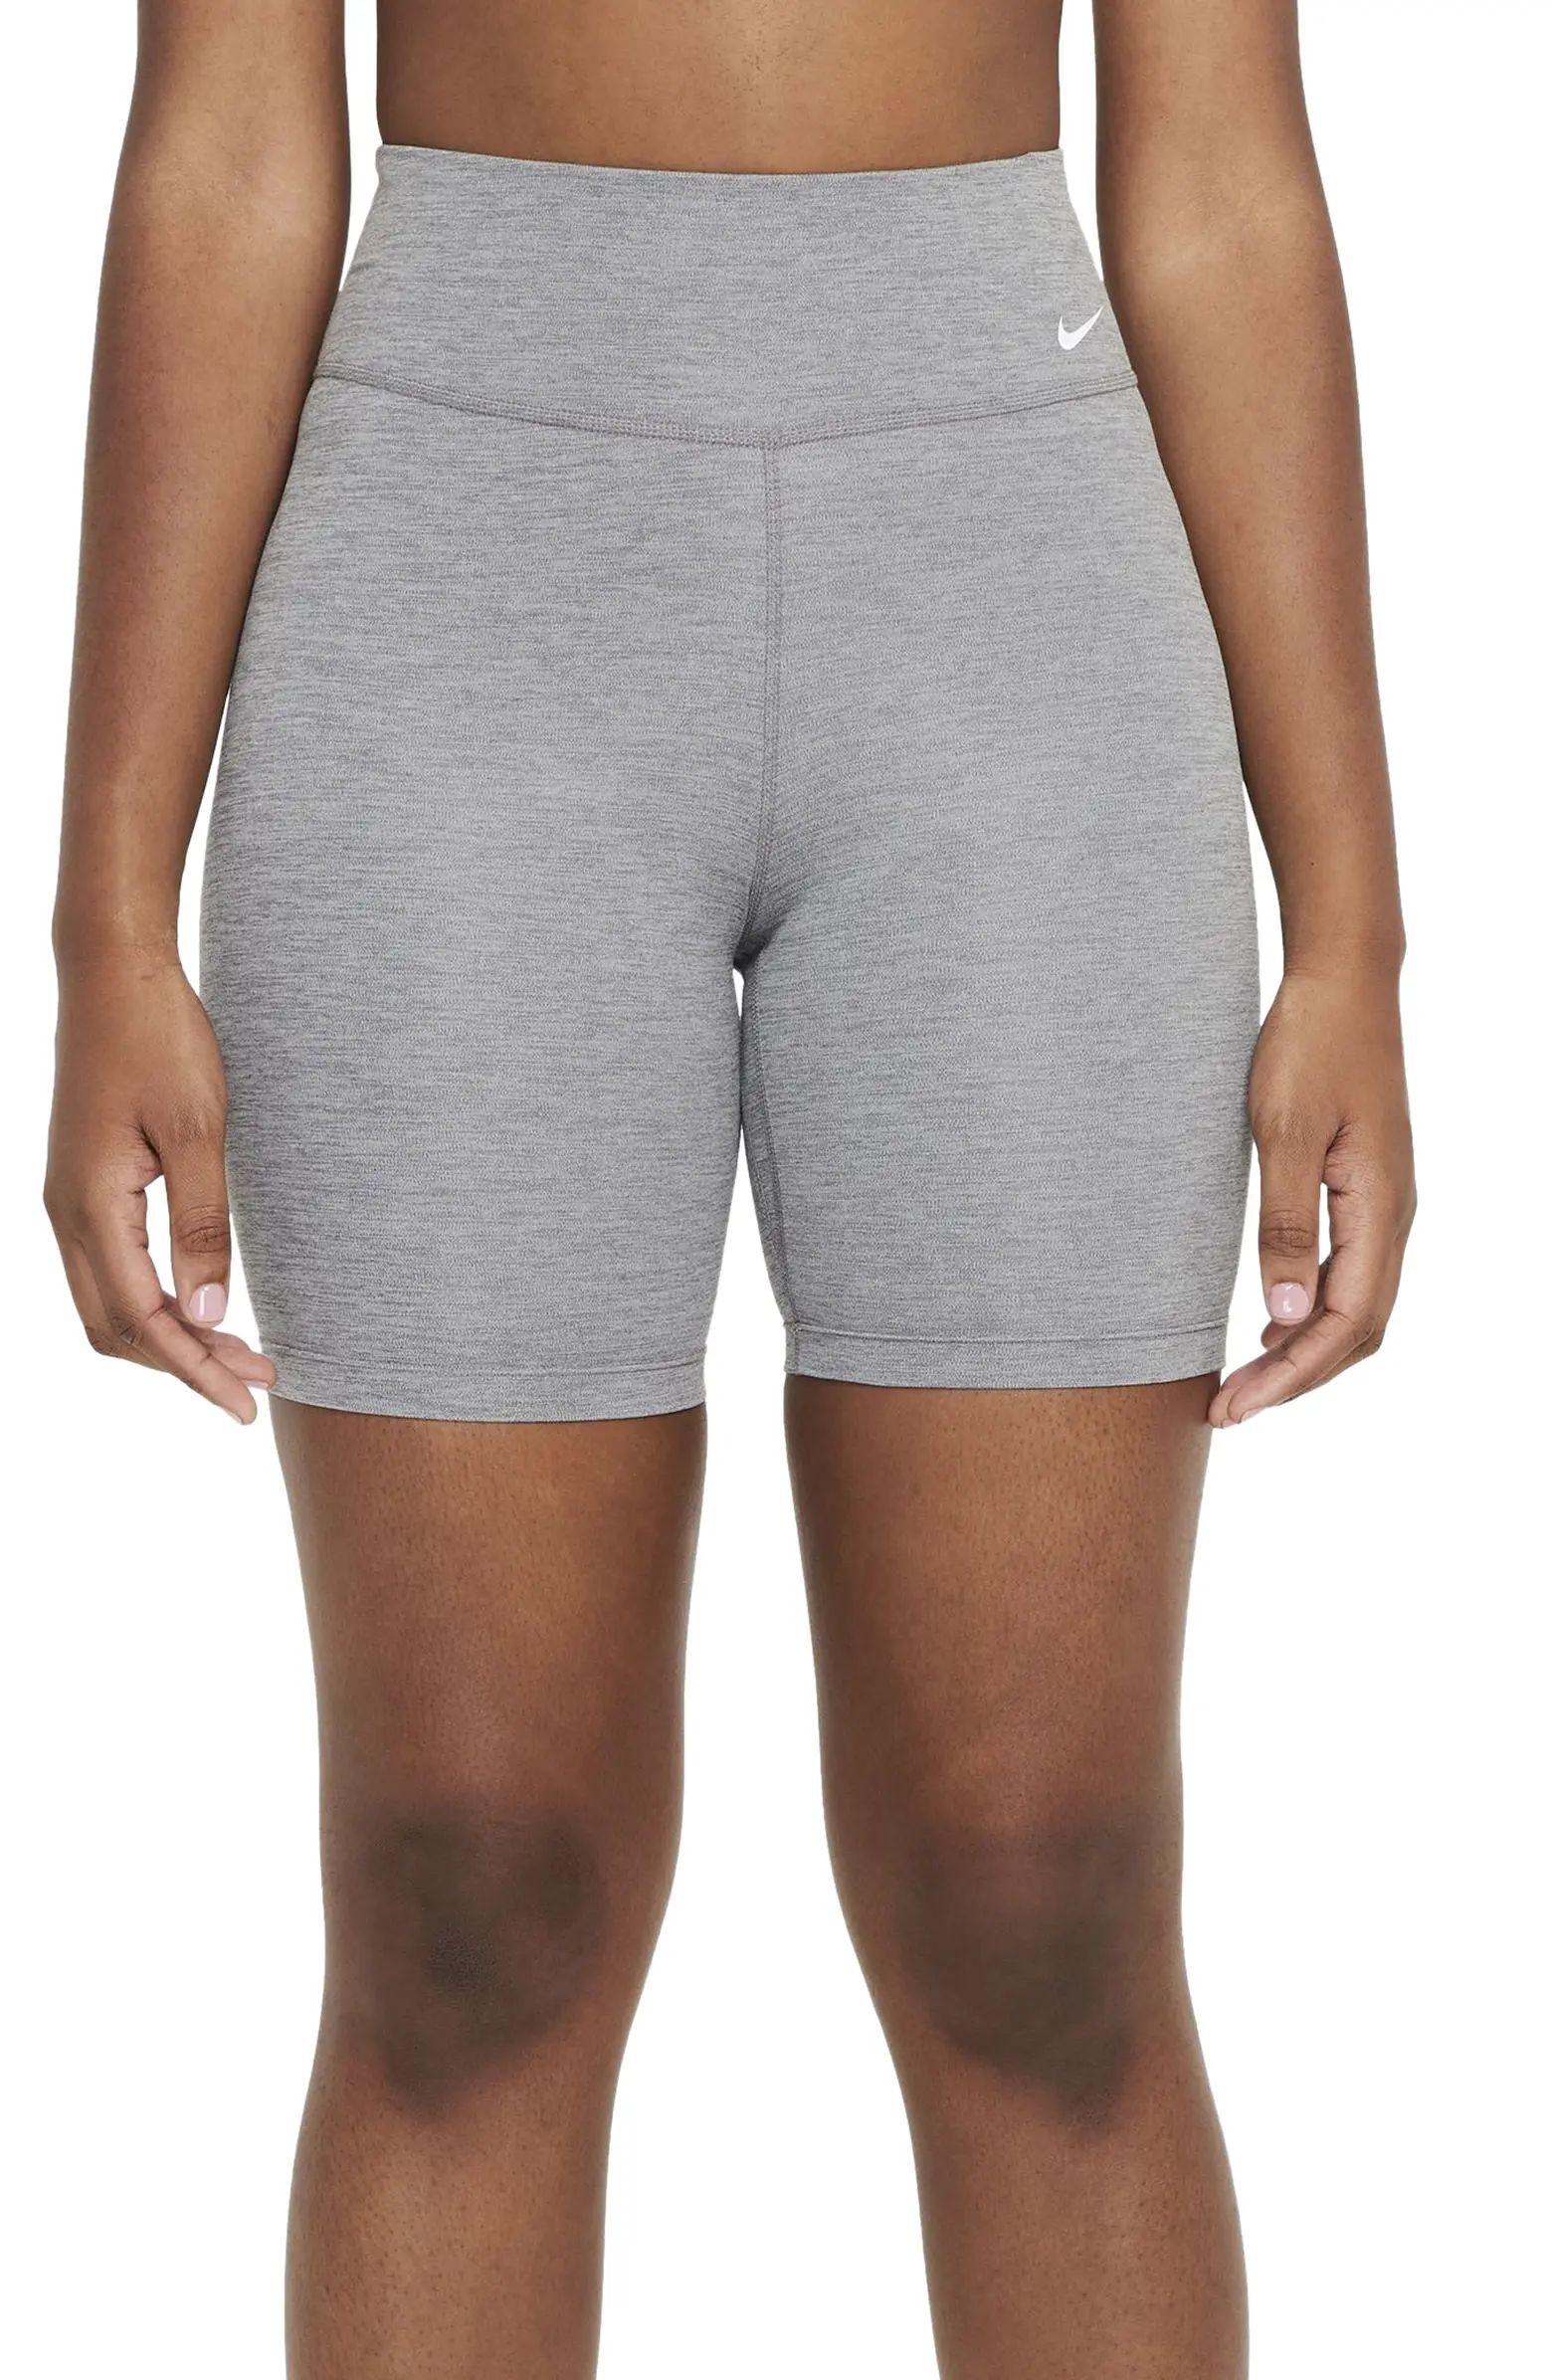 One Mid-Rise Bike Shorts | Nordstrom